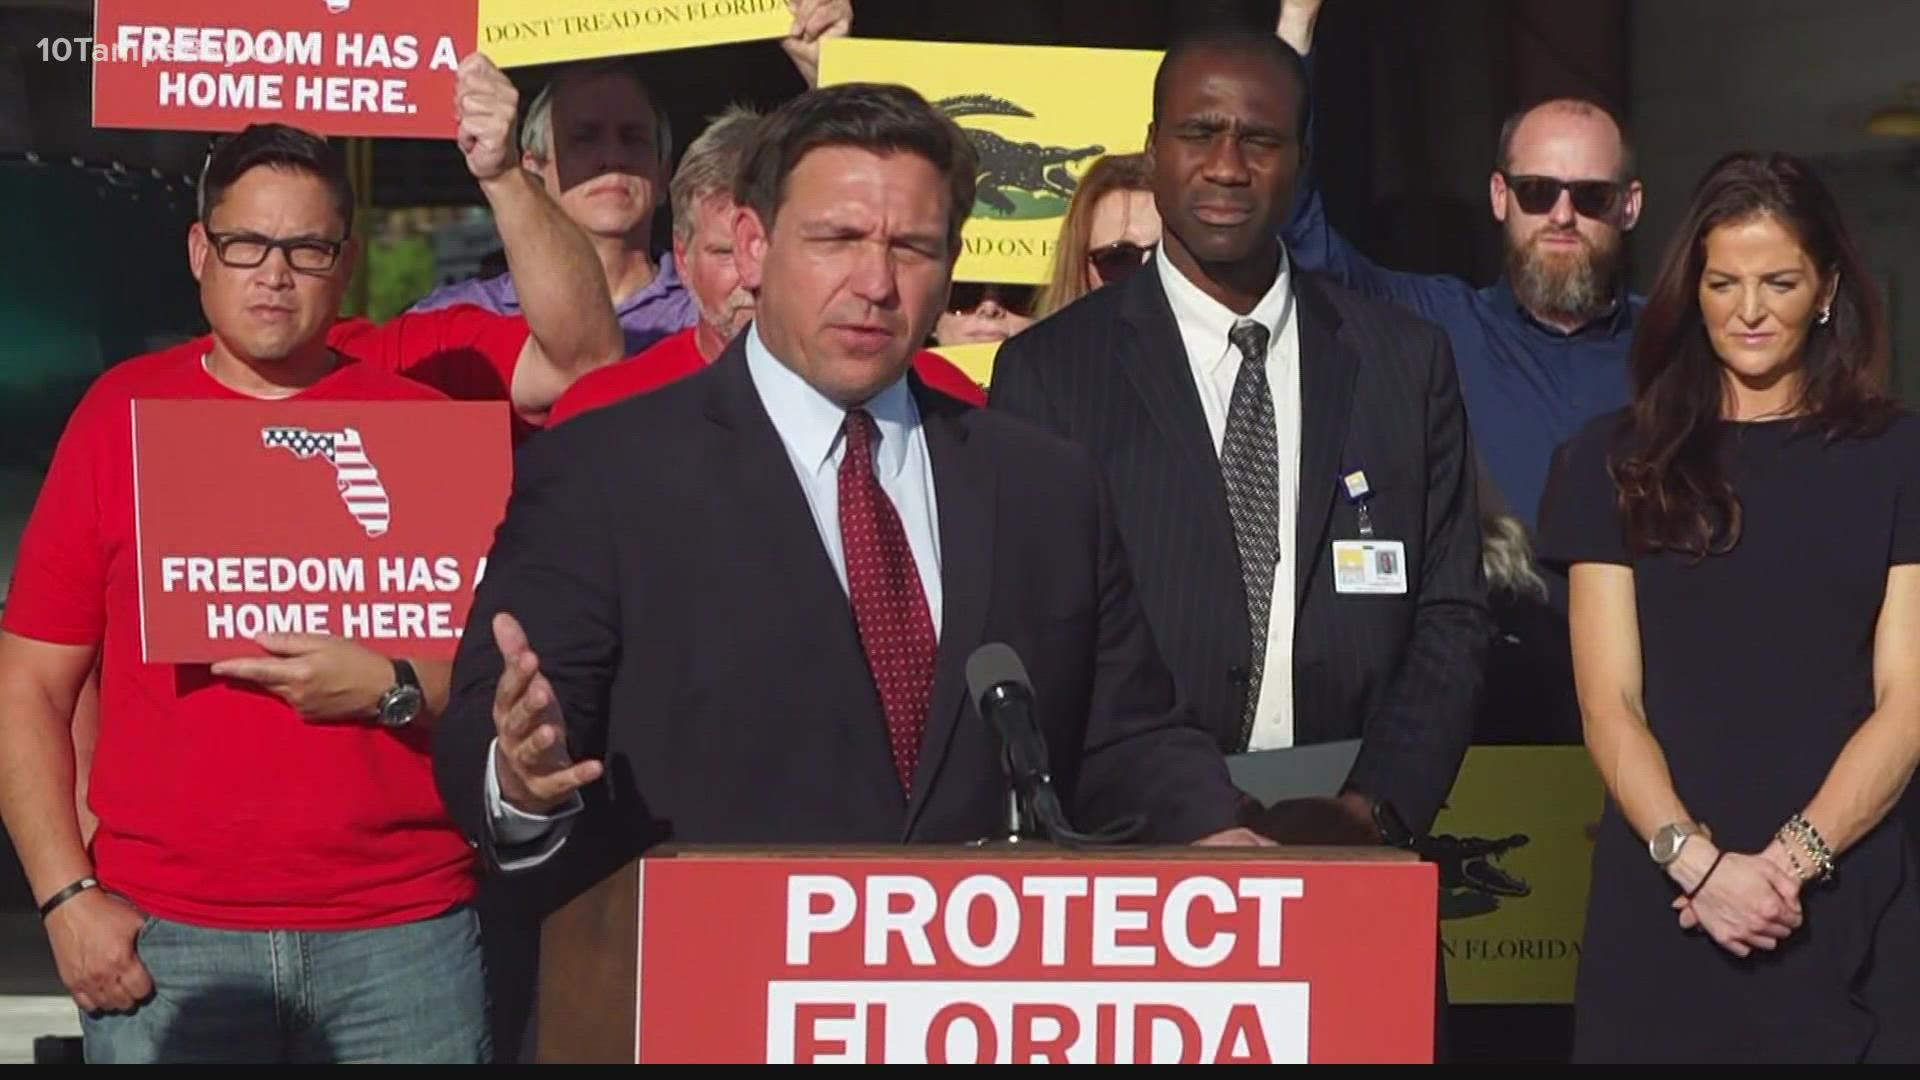 The DeSantis administration is currently facing legal challenges from local governments, school boards and parent groups over masking.